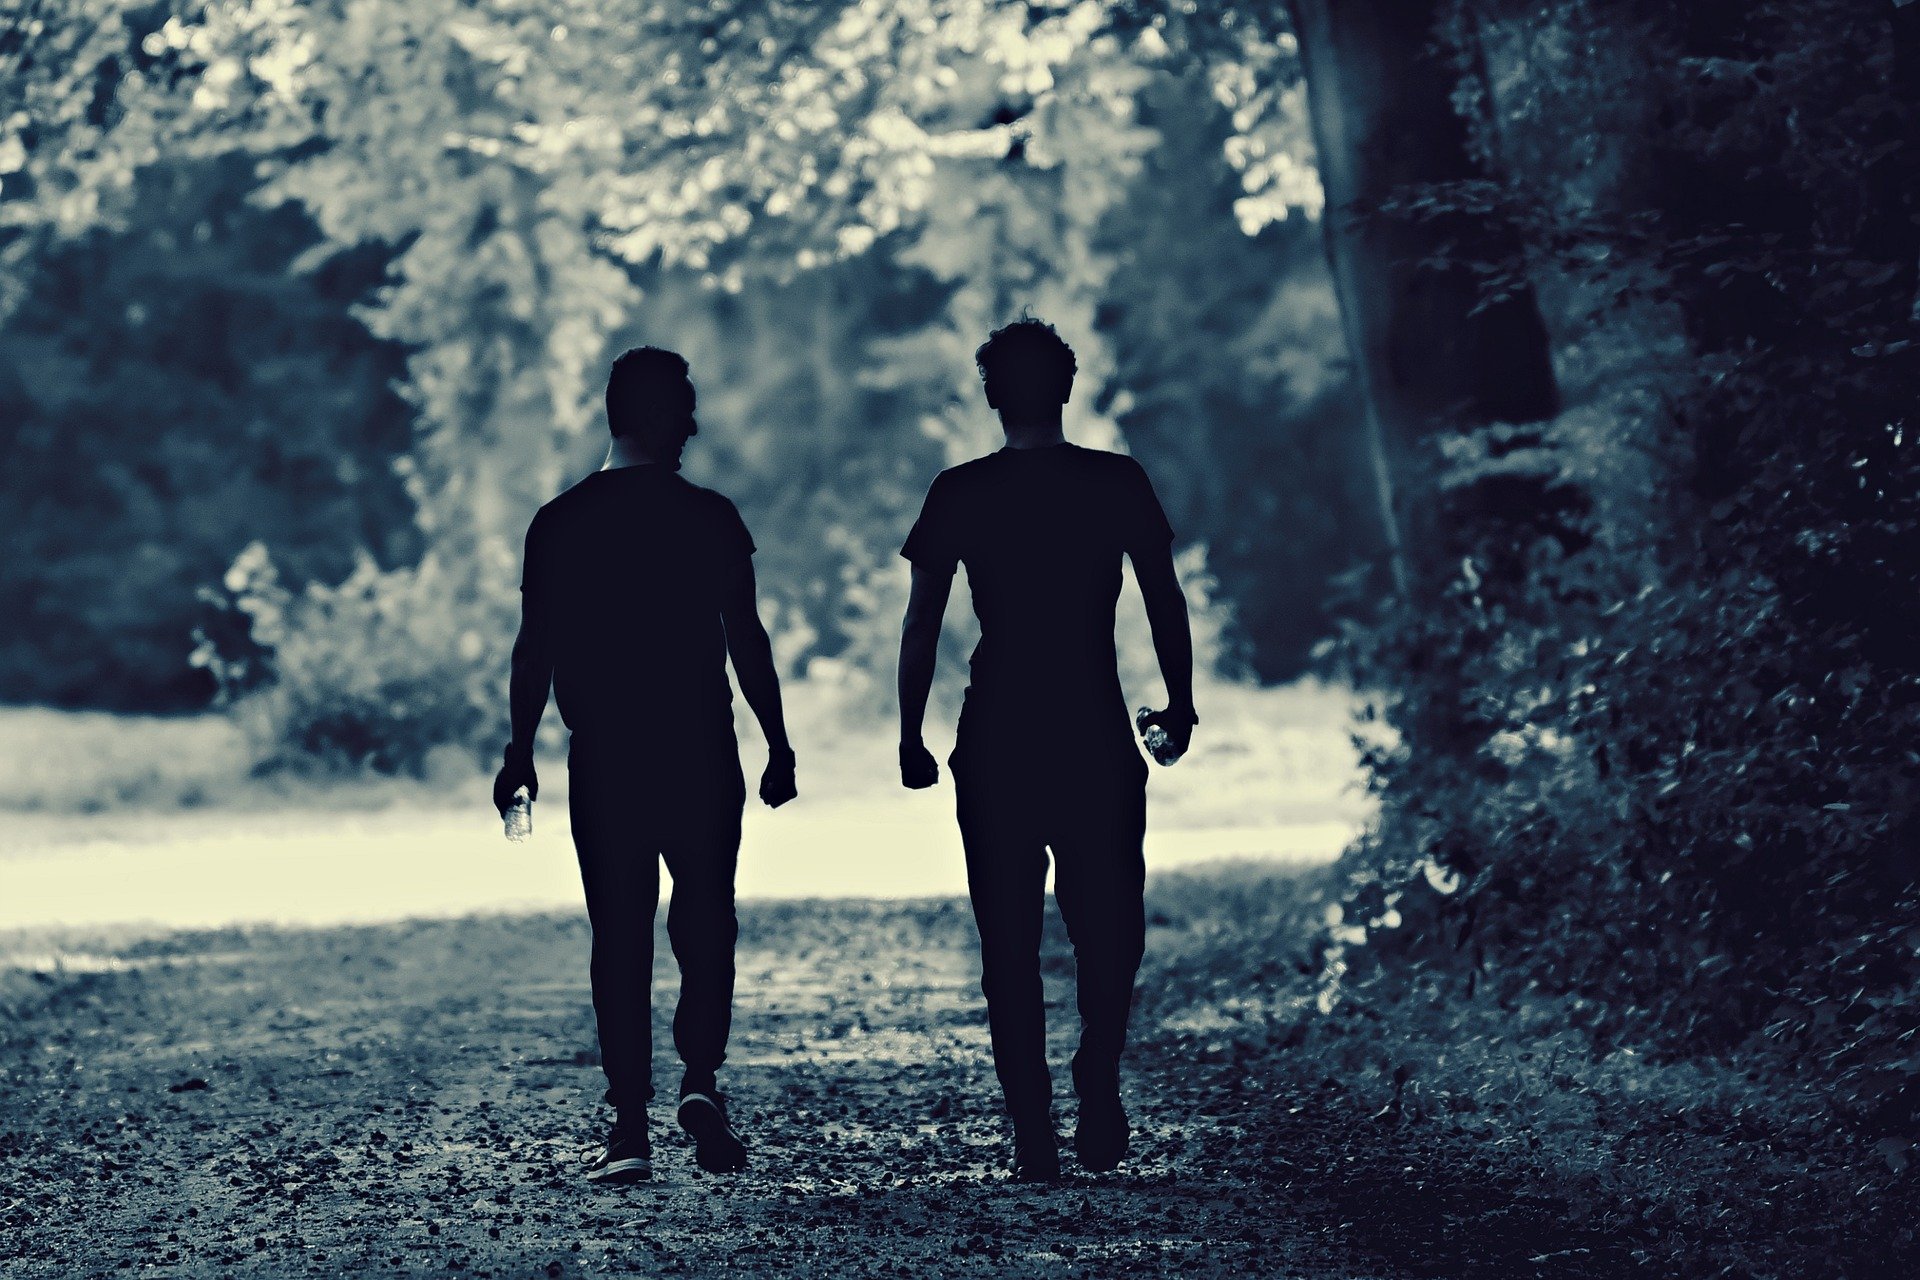 Two men walking on a nature trail. | Source: Pixabay.